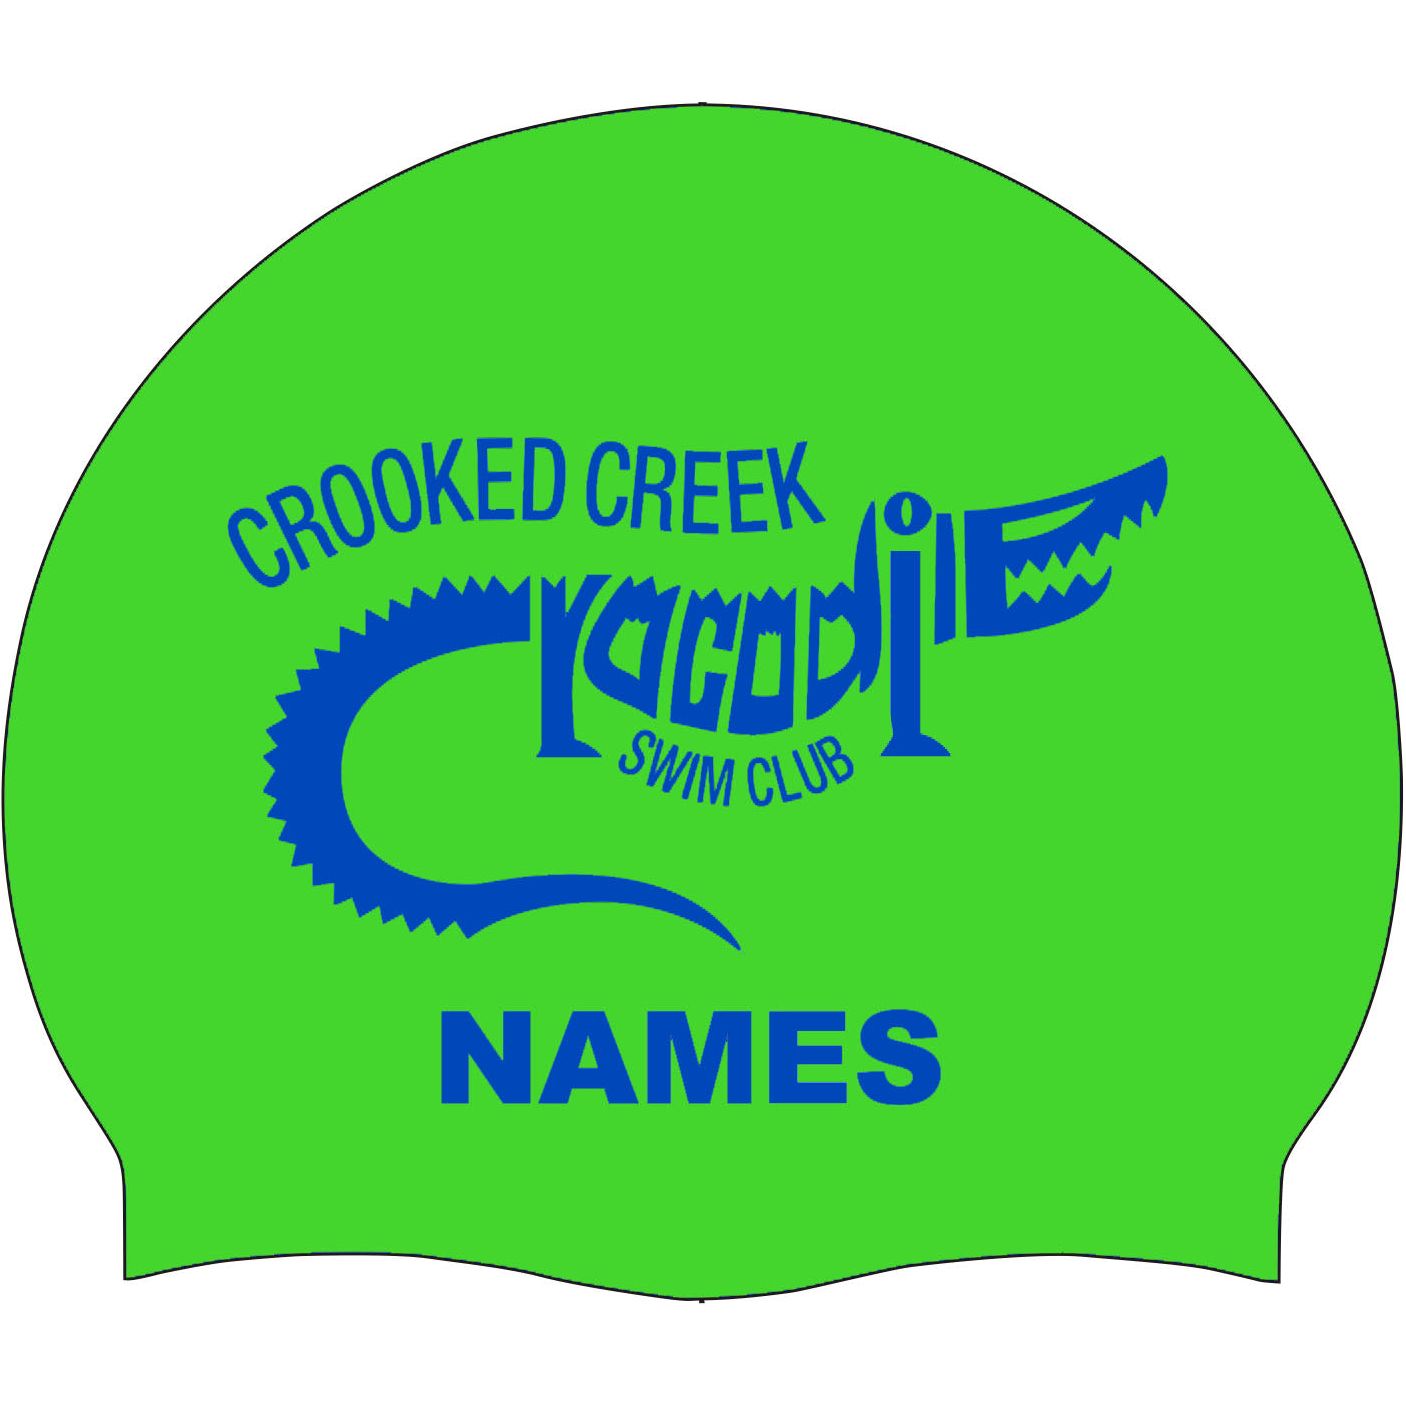 Personalized Silicone Caps (2 Pack) - Crooked Creek